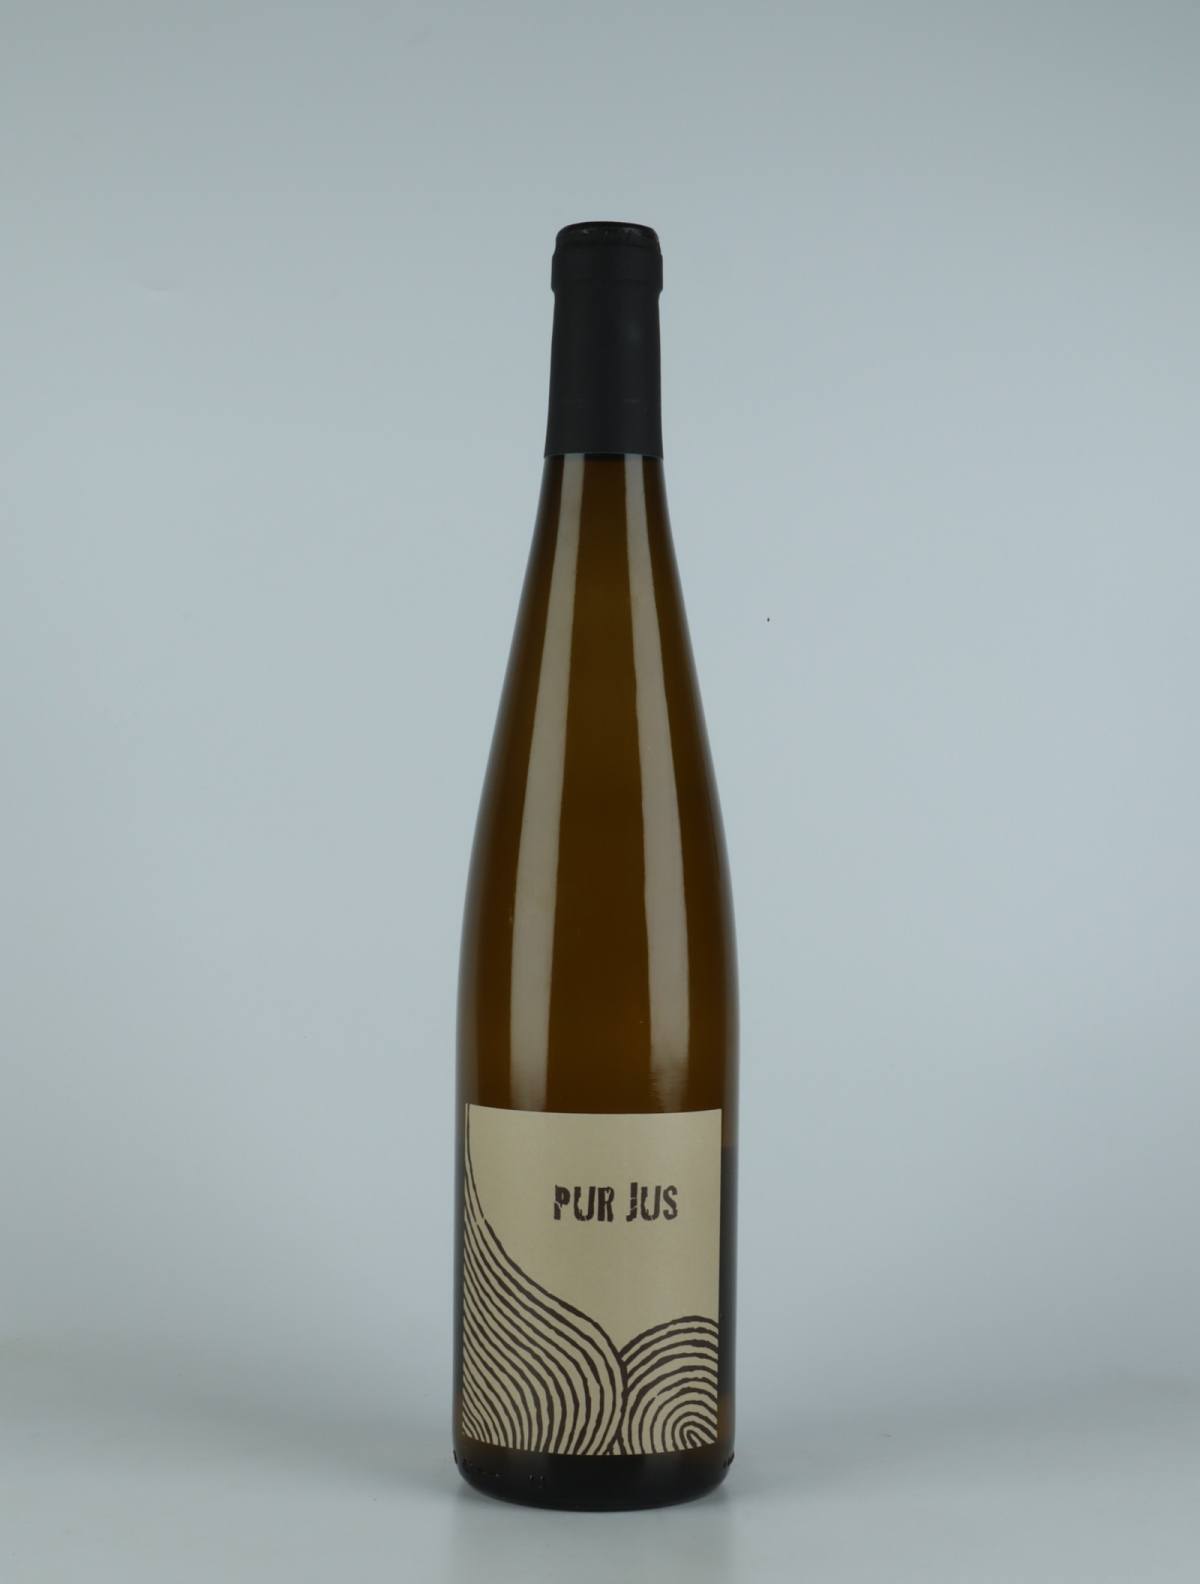 A bottle 2021 Pur Jus Blanc White wine from Ruhlmann Dirringer, Alsace in France